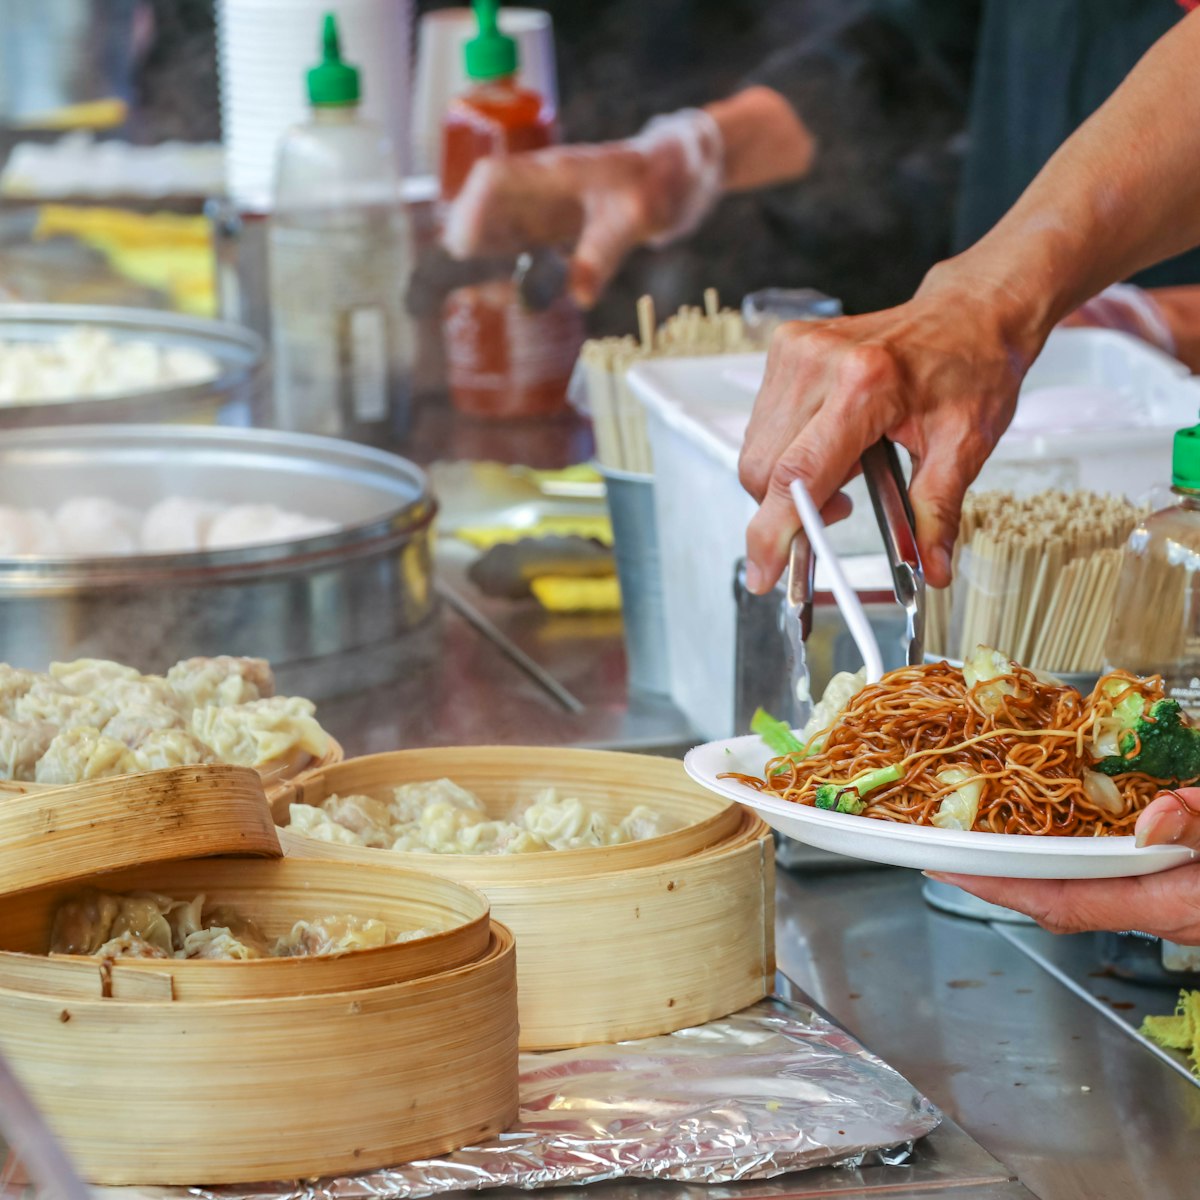 Richmond, BC, Canada - July 6, 2018:  Piling food onto a plate. The night market is a popular destination on weekends in Vancouver.   Food is the highlight of the market.